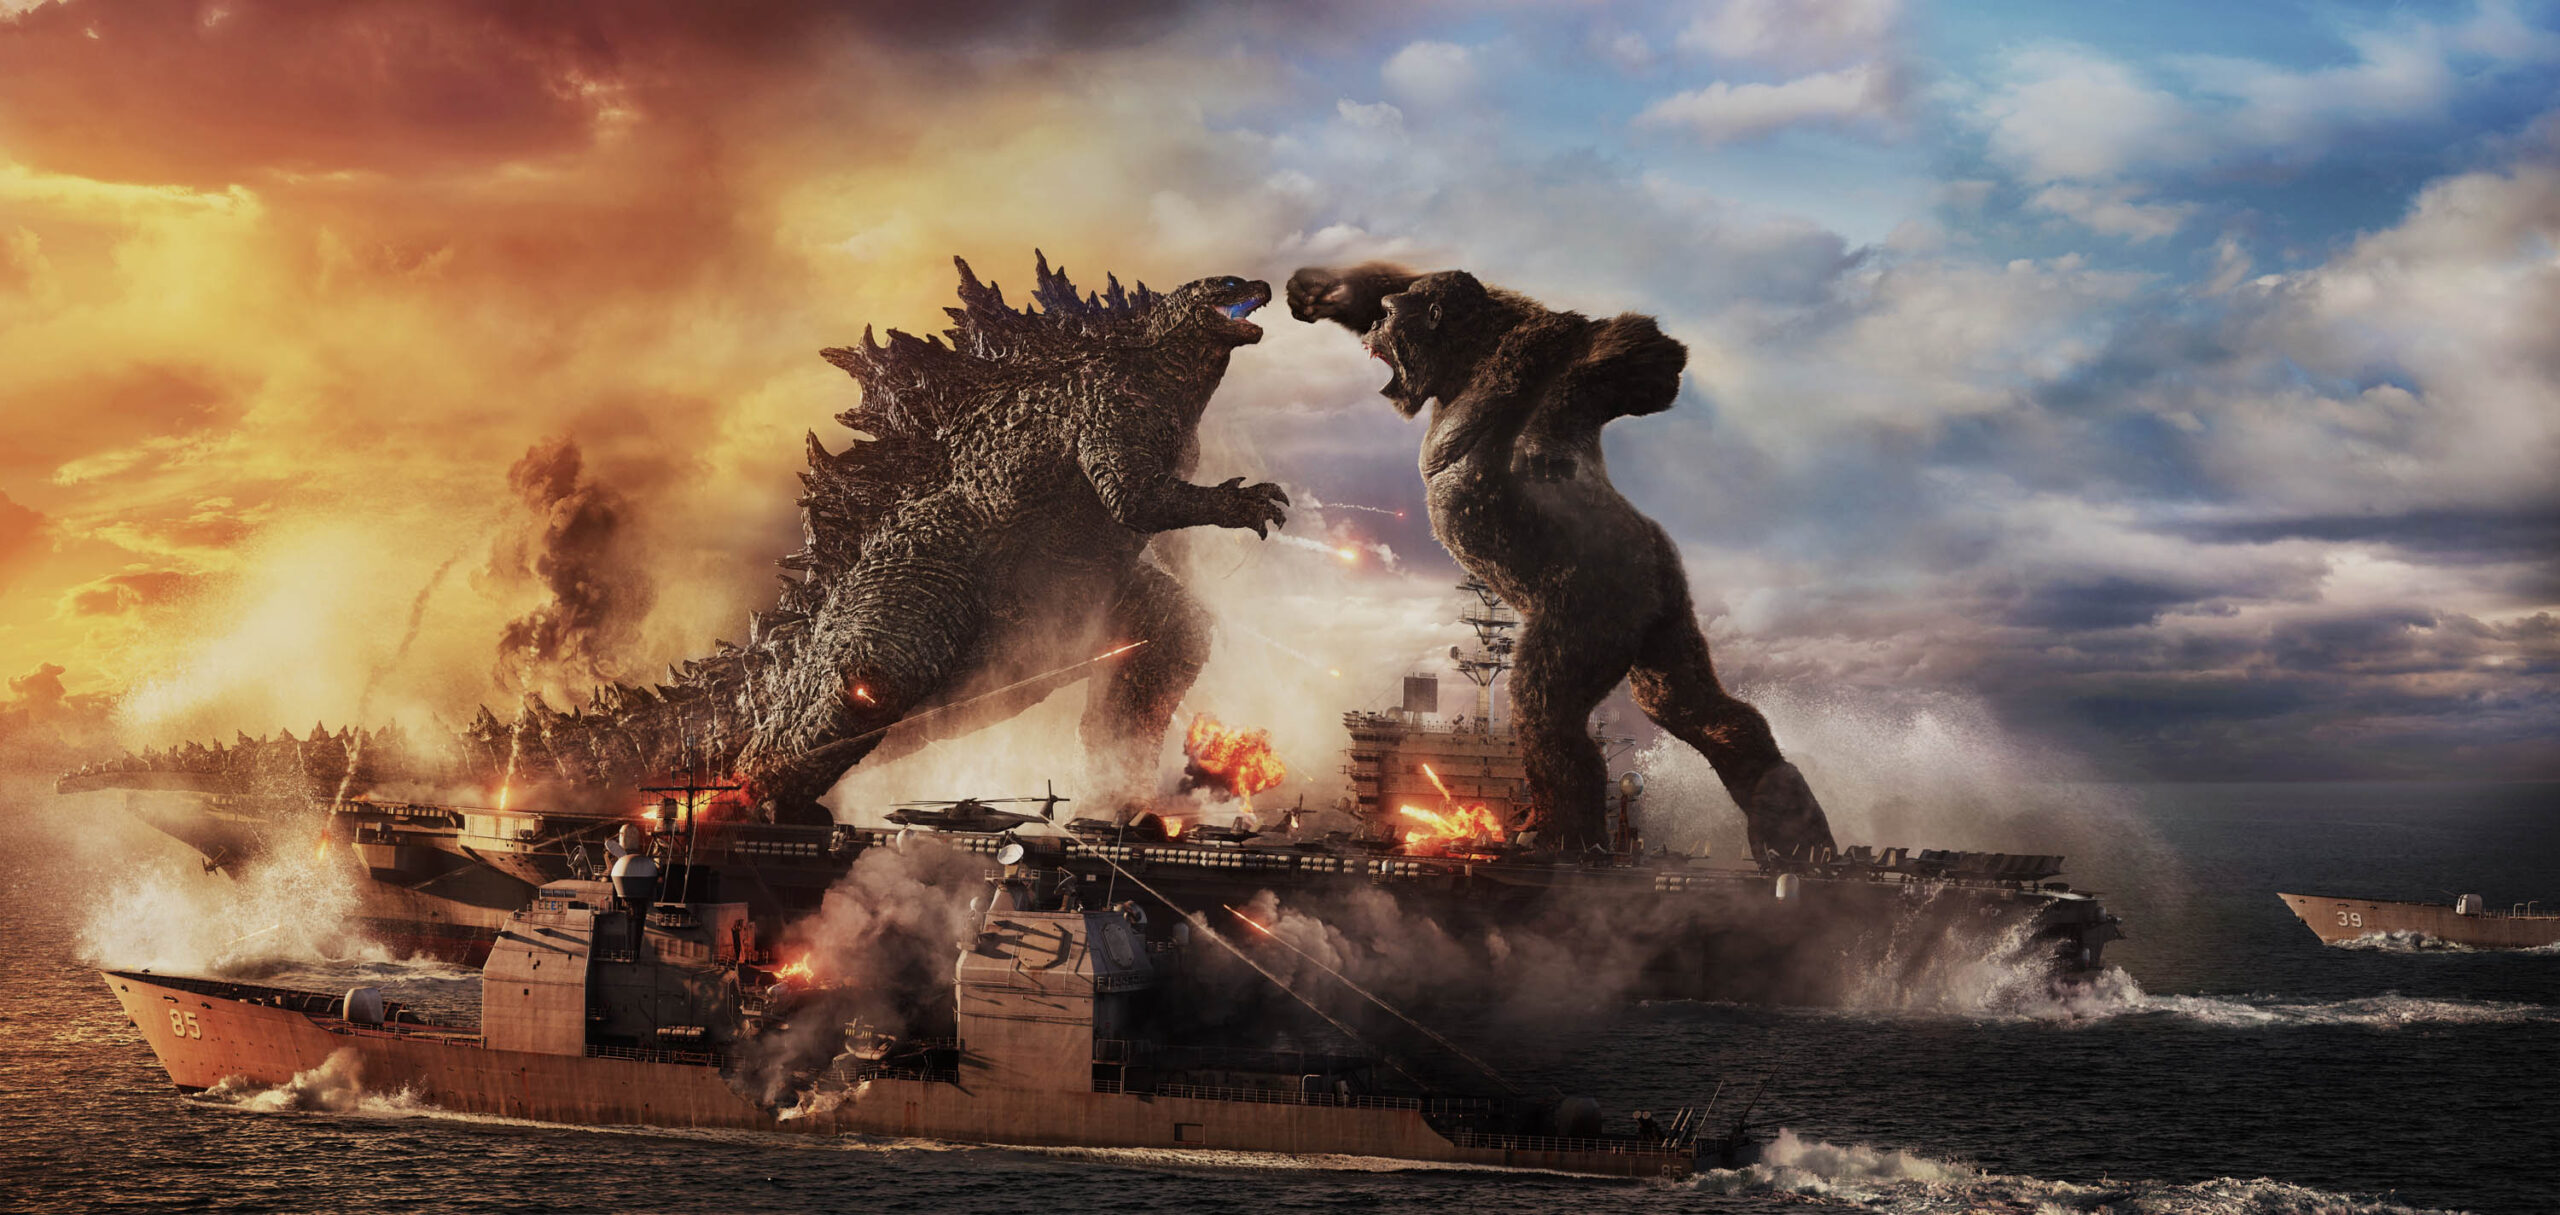 Godzilla combatte con Kong in 'Godzilla vs. Kong' [credit: Copyright 2021 Legendary and Warner Bros. Entertainment Inc. All Rights Reserved. Godzilla TM and Copyright Toho Co., Ltd.; courtesy of Warner Bros. Pictures e Legendary Pictures]